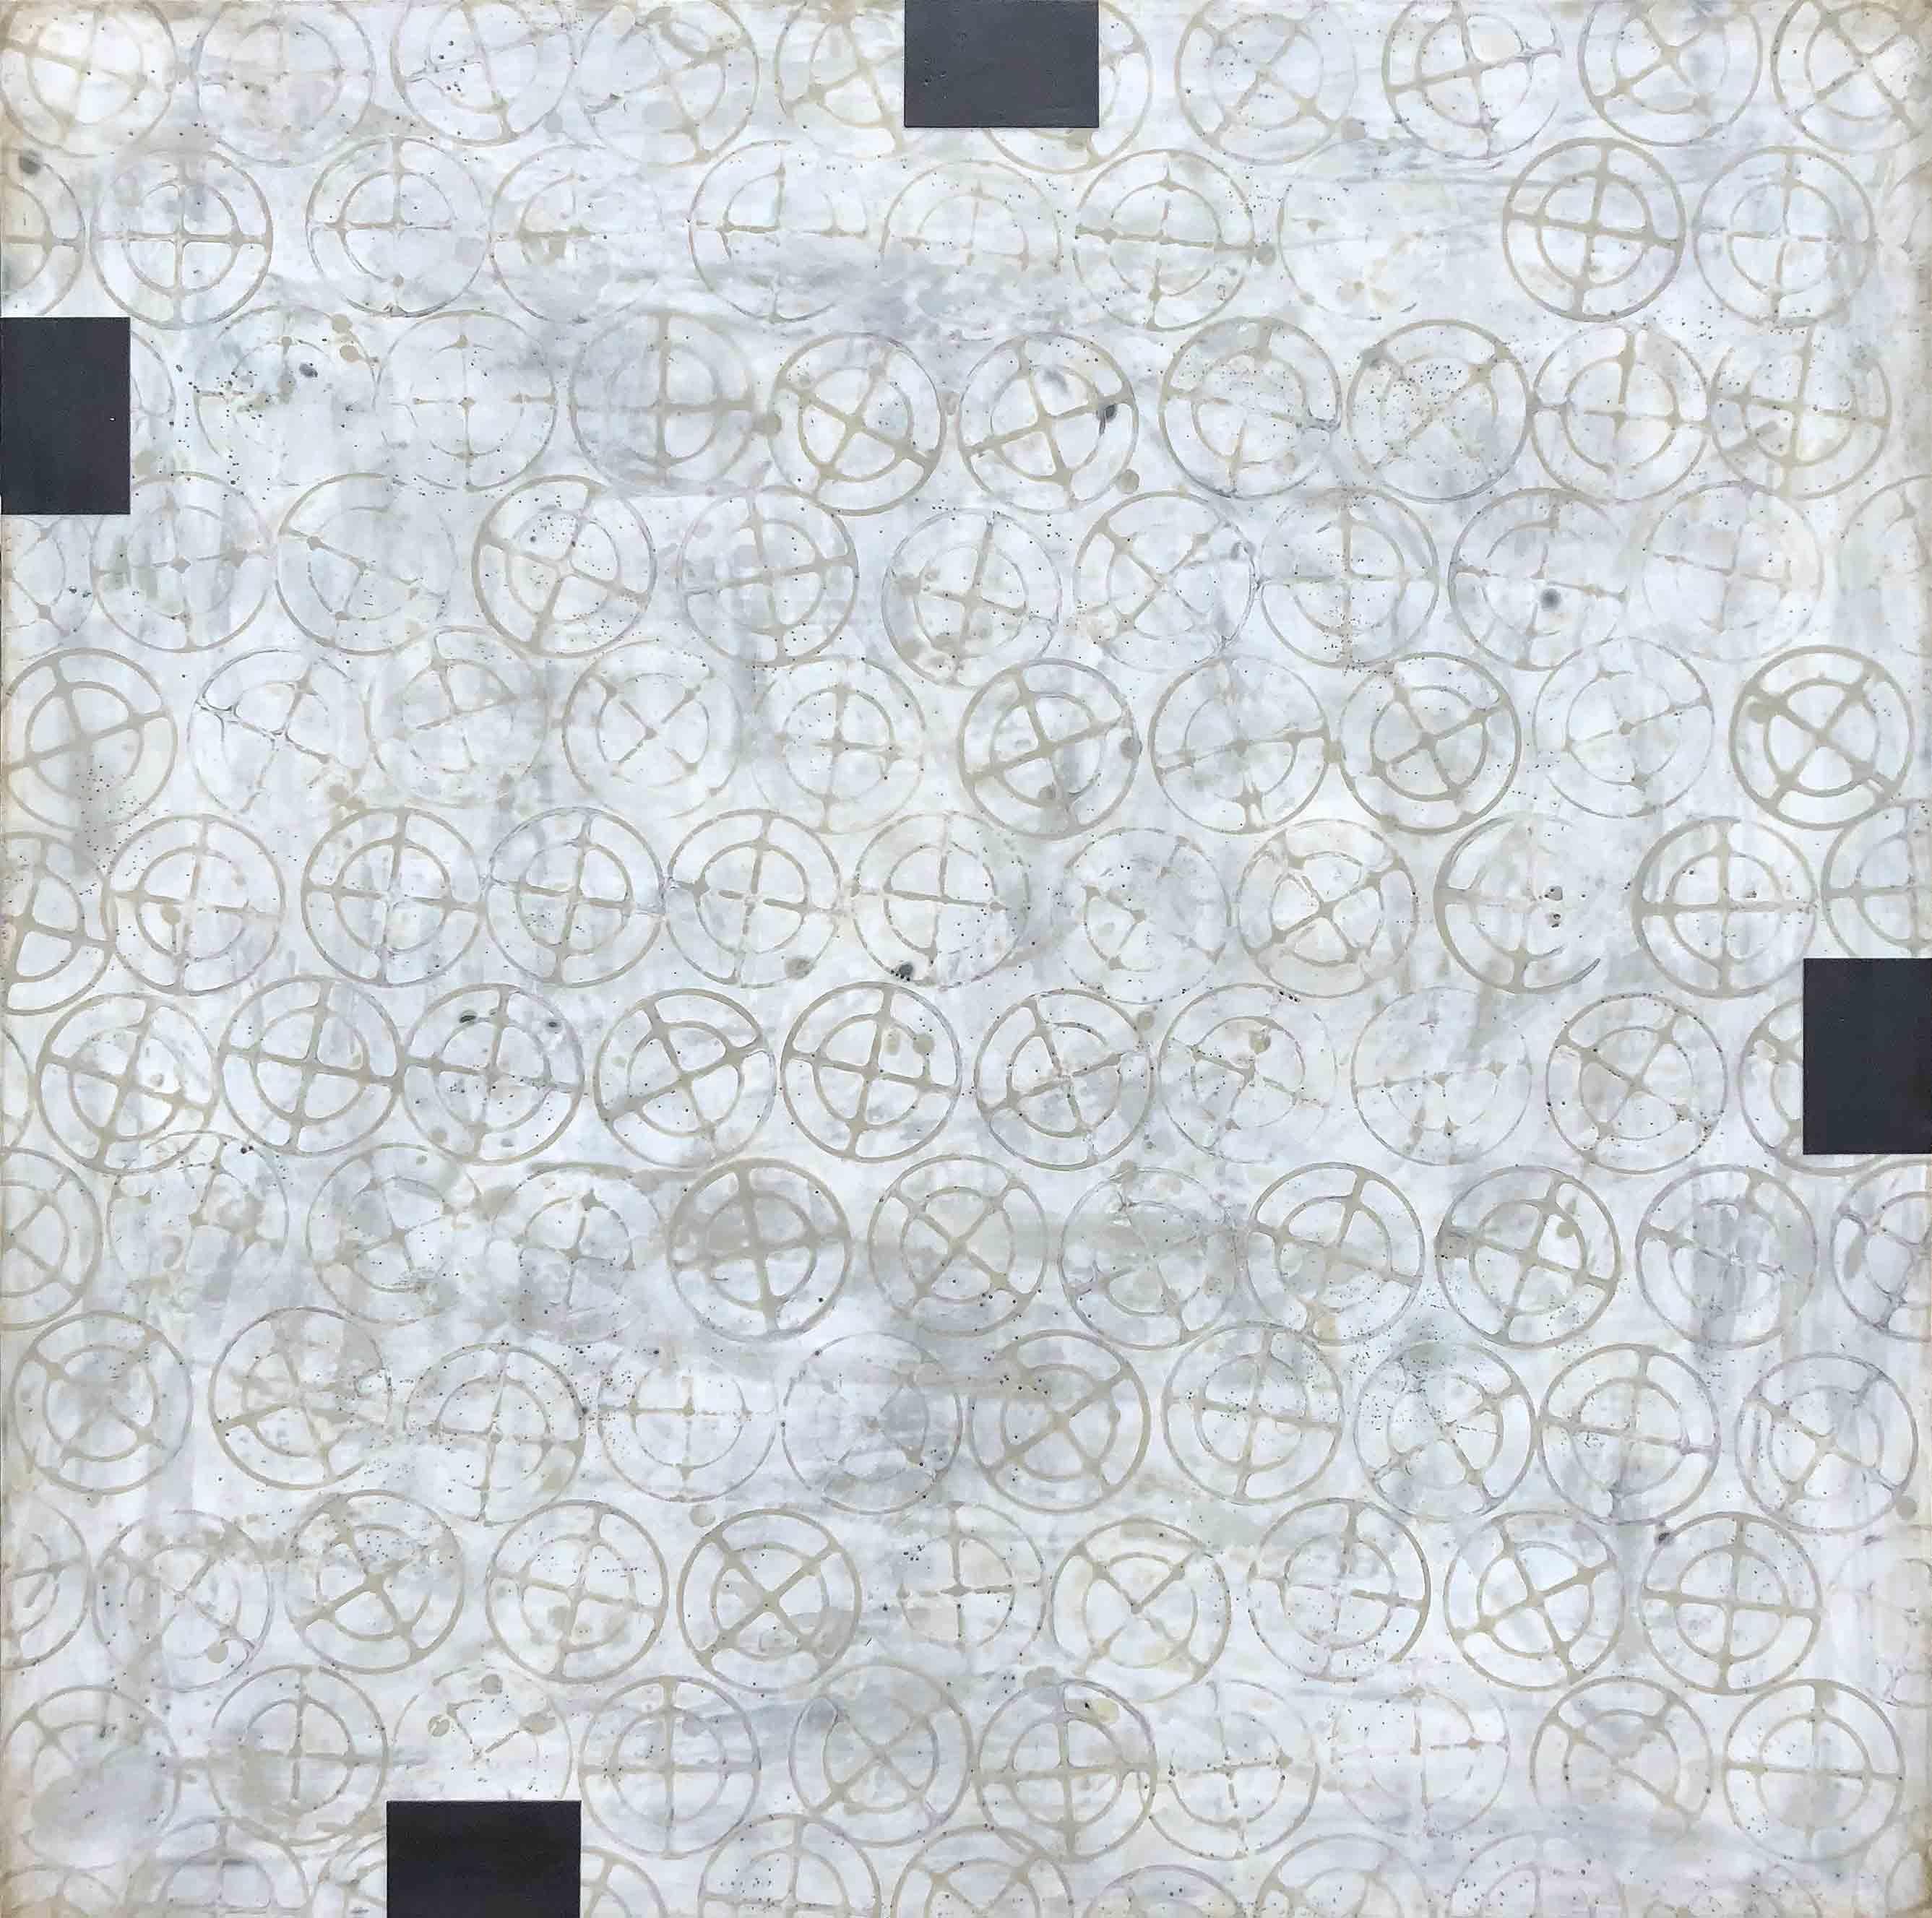 In the Absence (Abstract White & Gray Encaustic, Circular Motif) - Mixed Media Art by Susan Stover